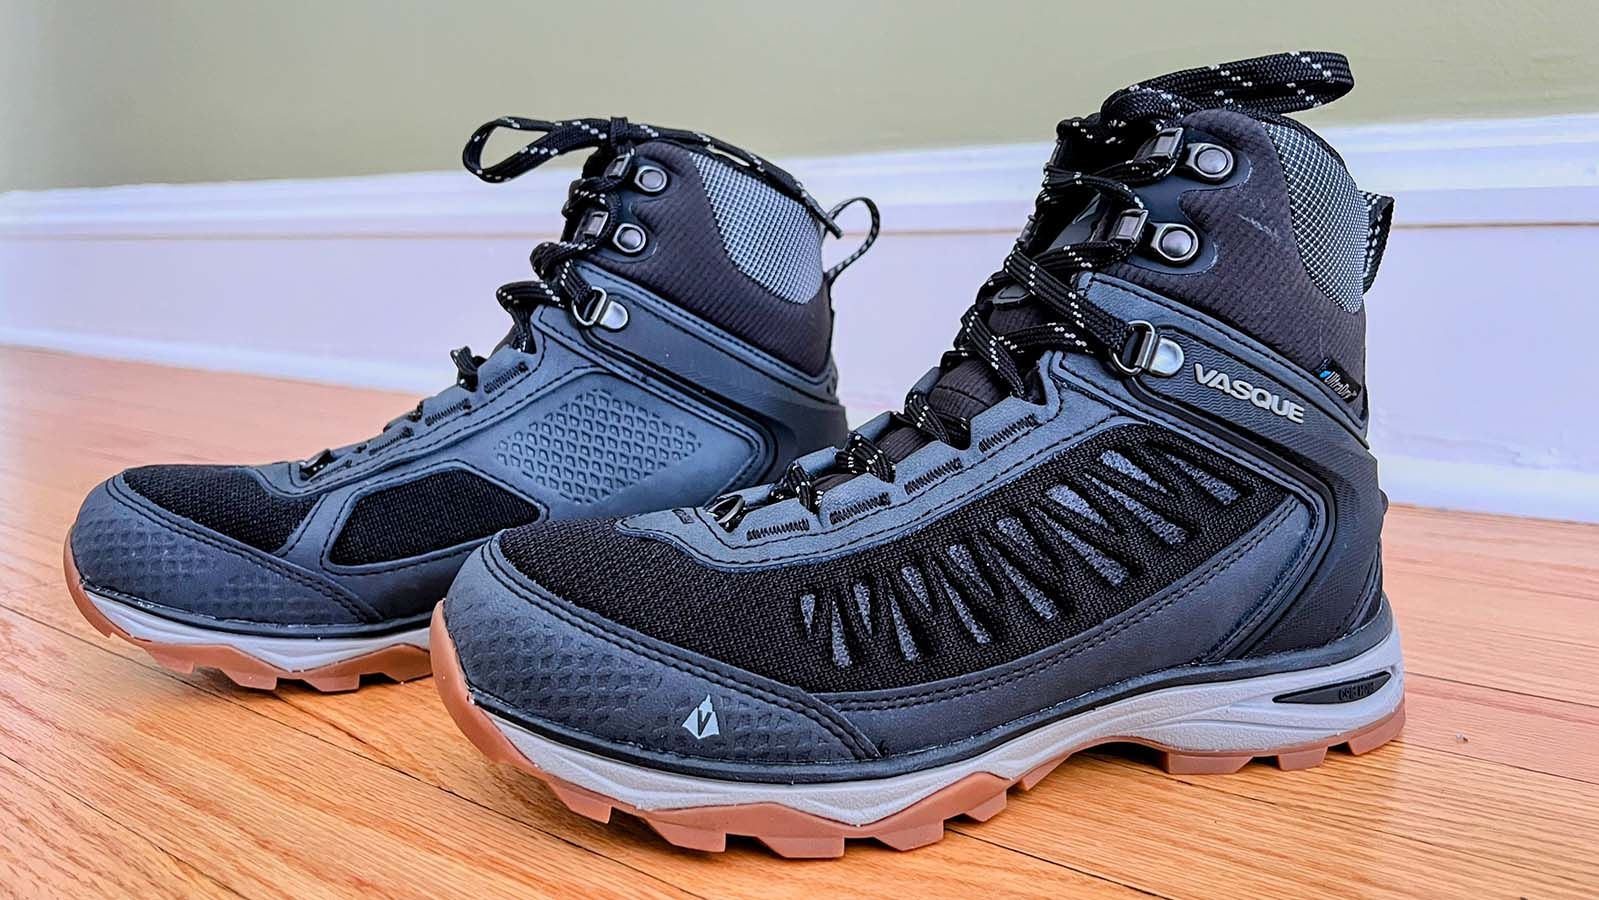 The Vasque Coldspark Ultradry hiking boot review